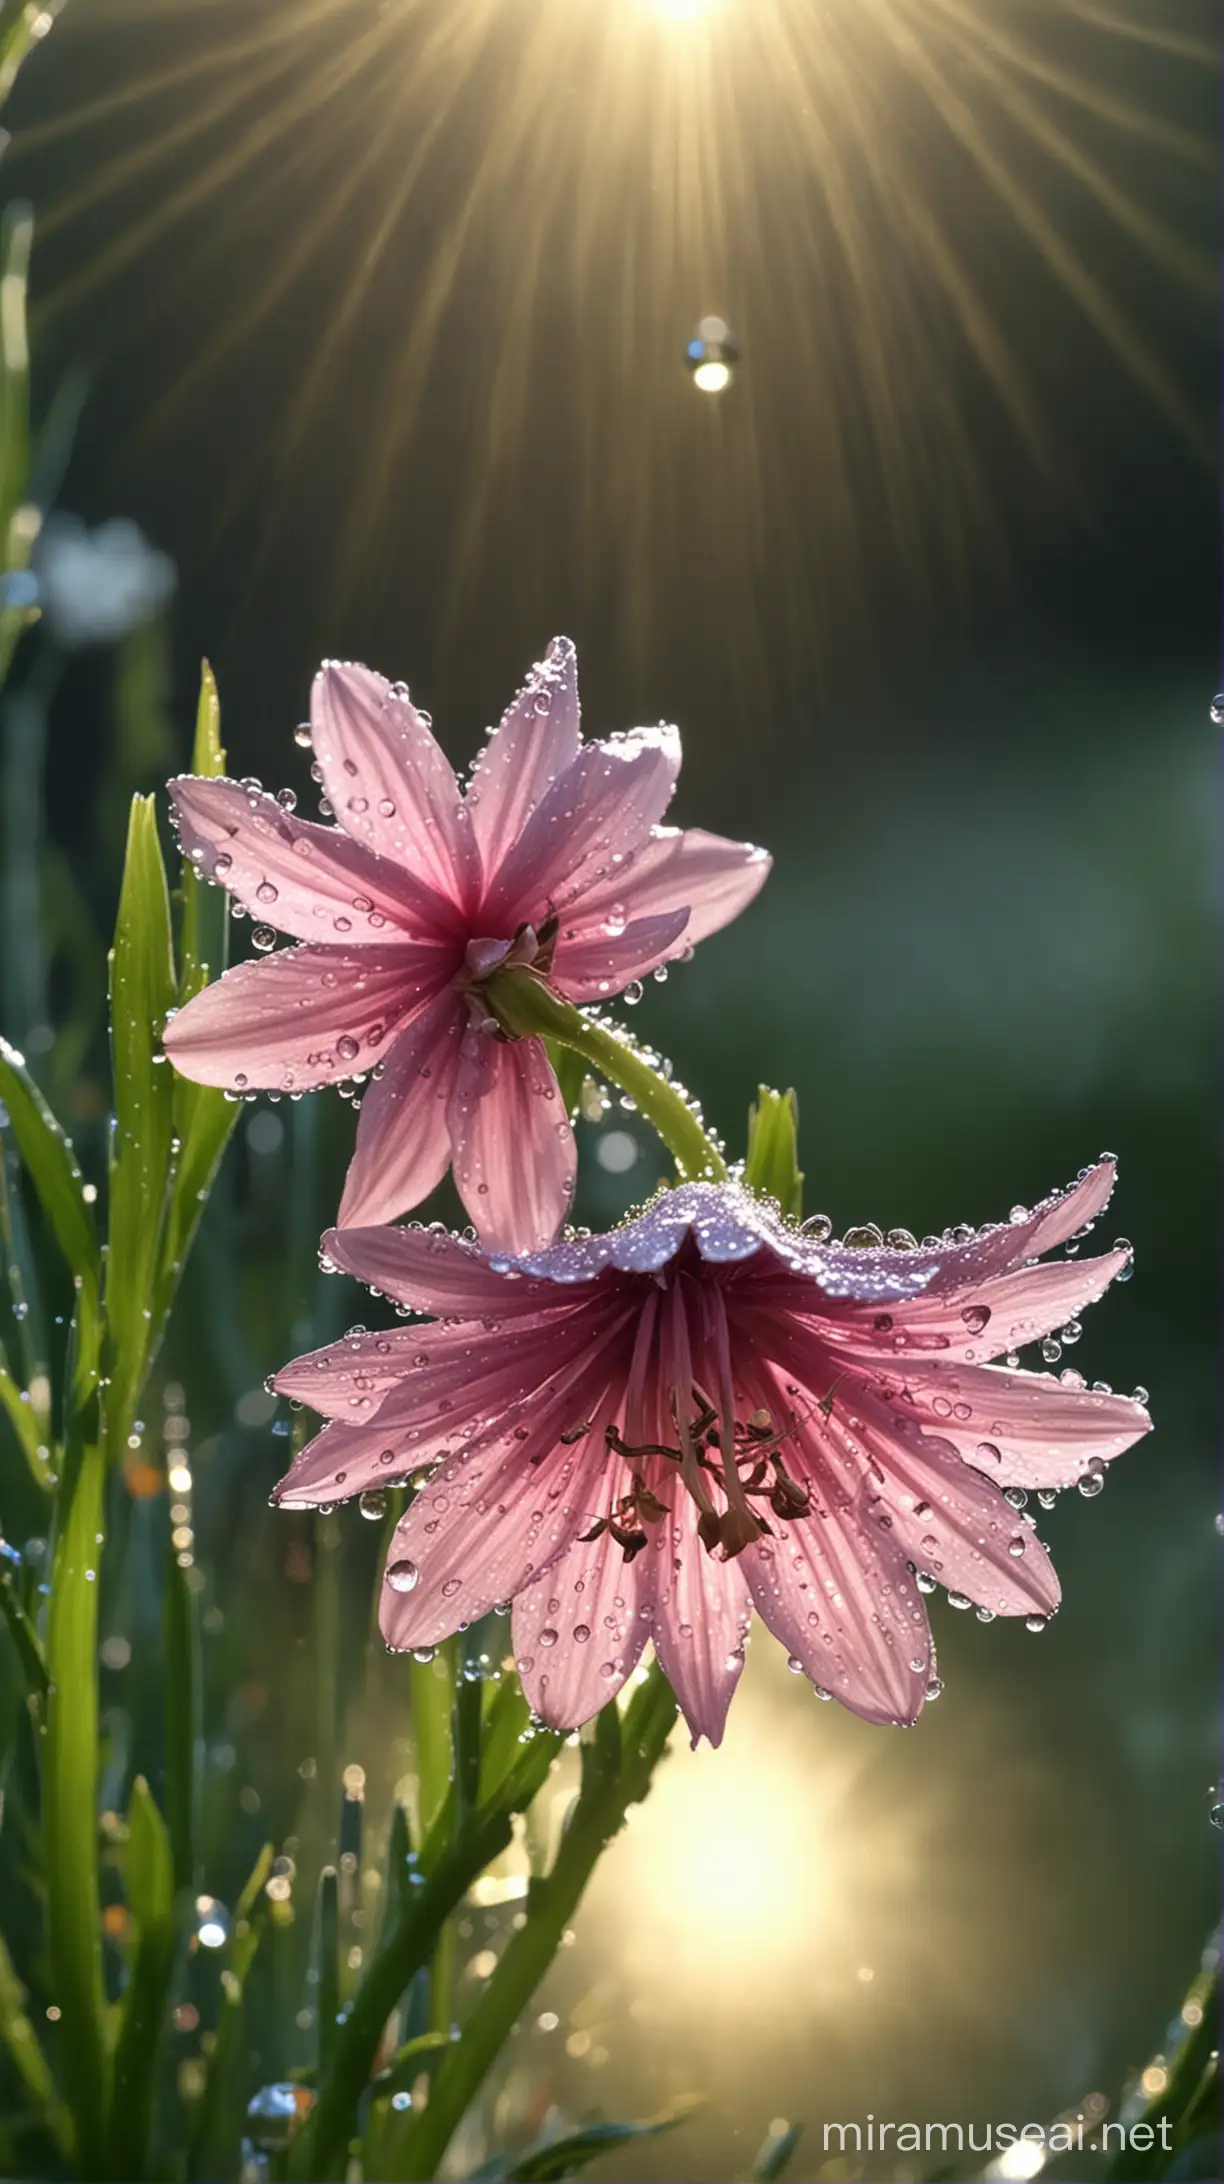 Sunlit Dewdrops Cascading from a Vibrant Flower